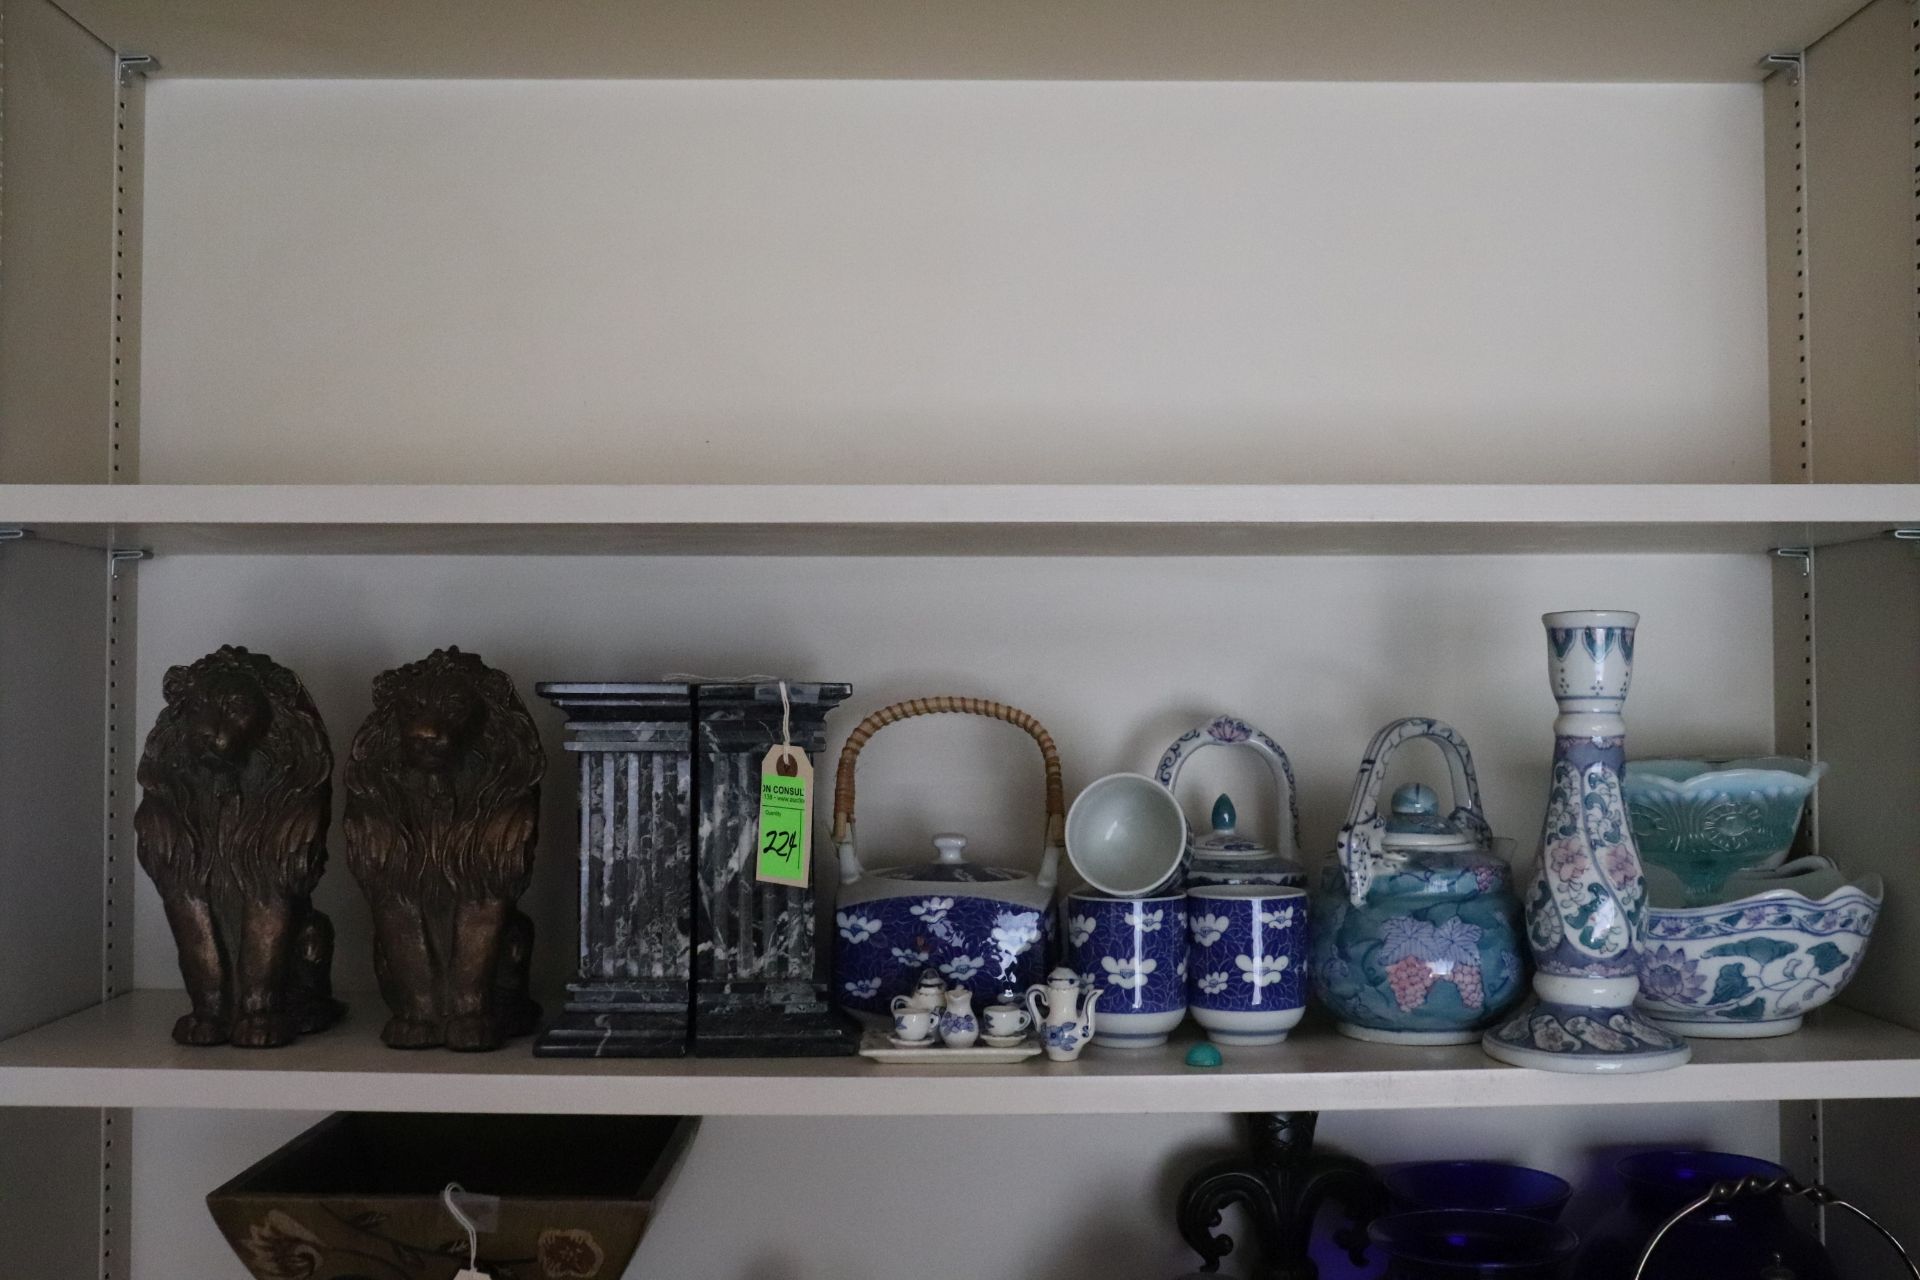 Miscellaneous bookends, tea sets and other